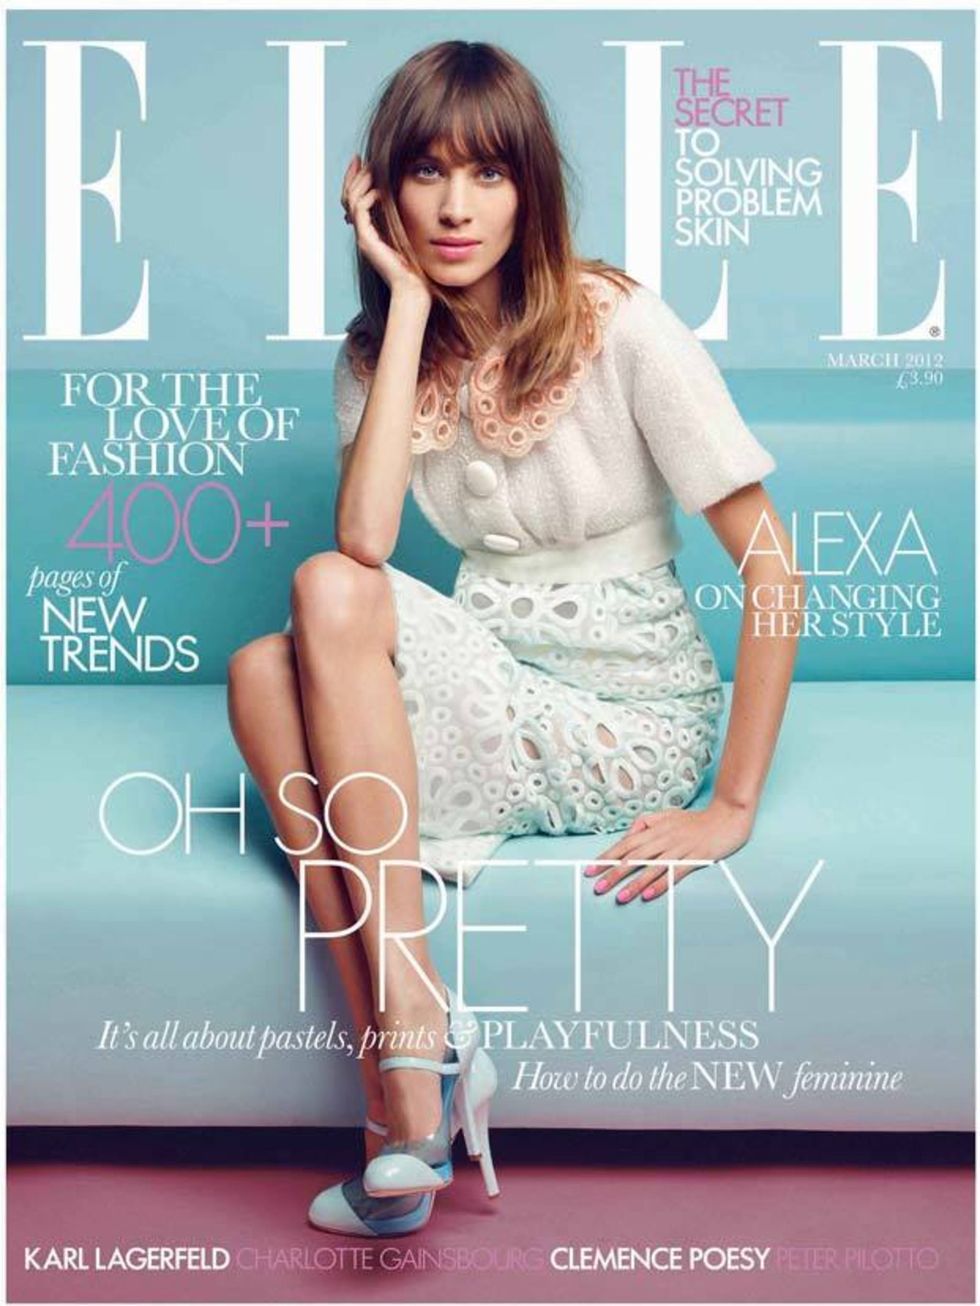 <p>The freshest, prettiest Alexa make up we ever saw, on the cover of March 2012 issue.</p>

<p>Florrie says:</p>

<p>'Perfect your skin and base - powder down the T-zone not forgetting around the nose and across the chin to keep shine at bay.'</p>

<p><a